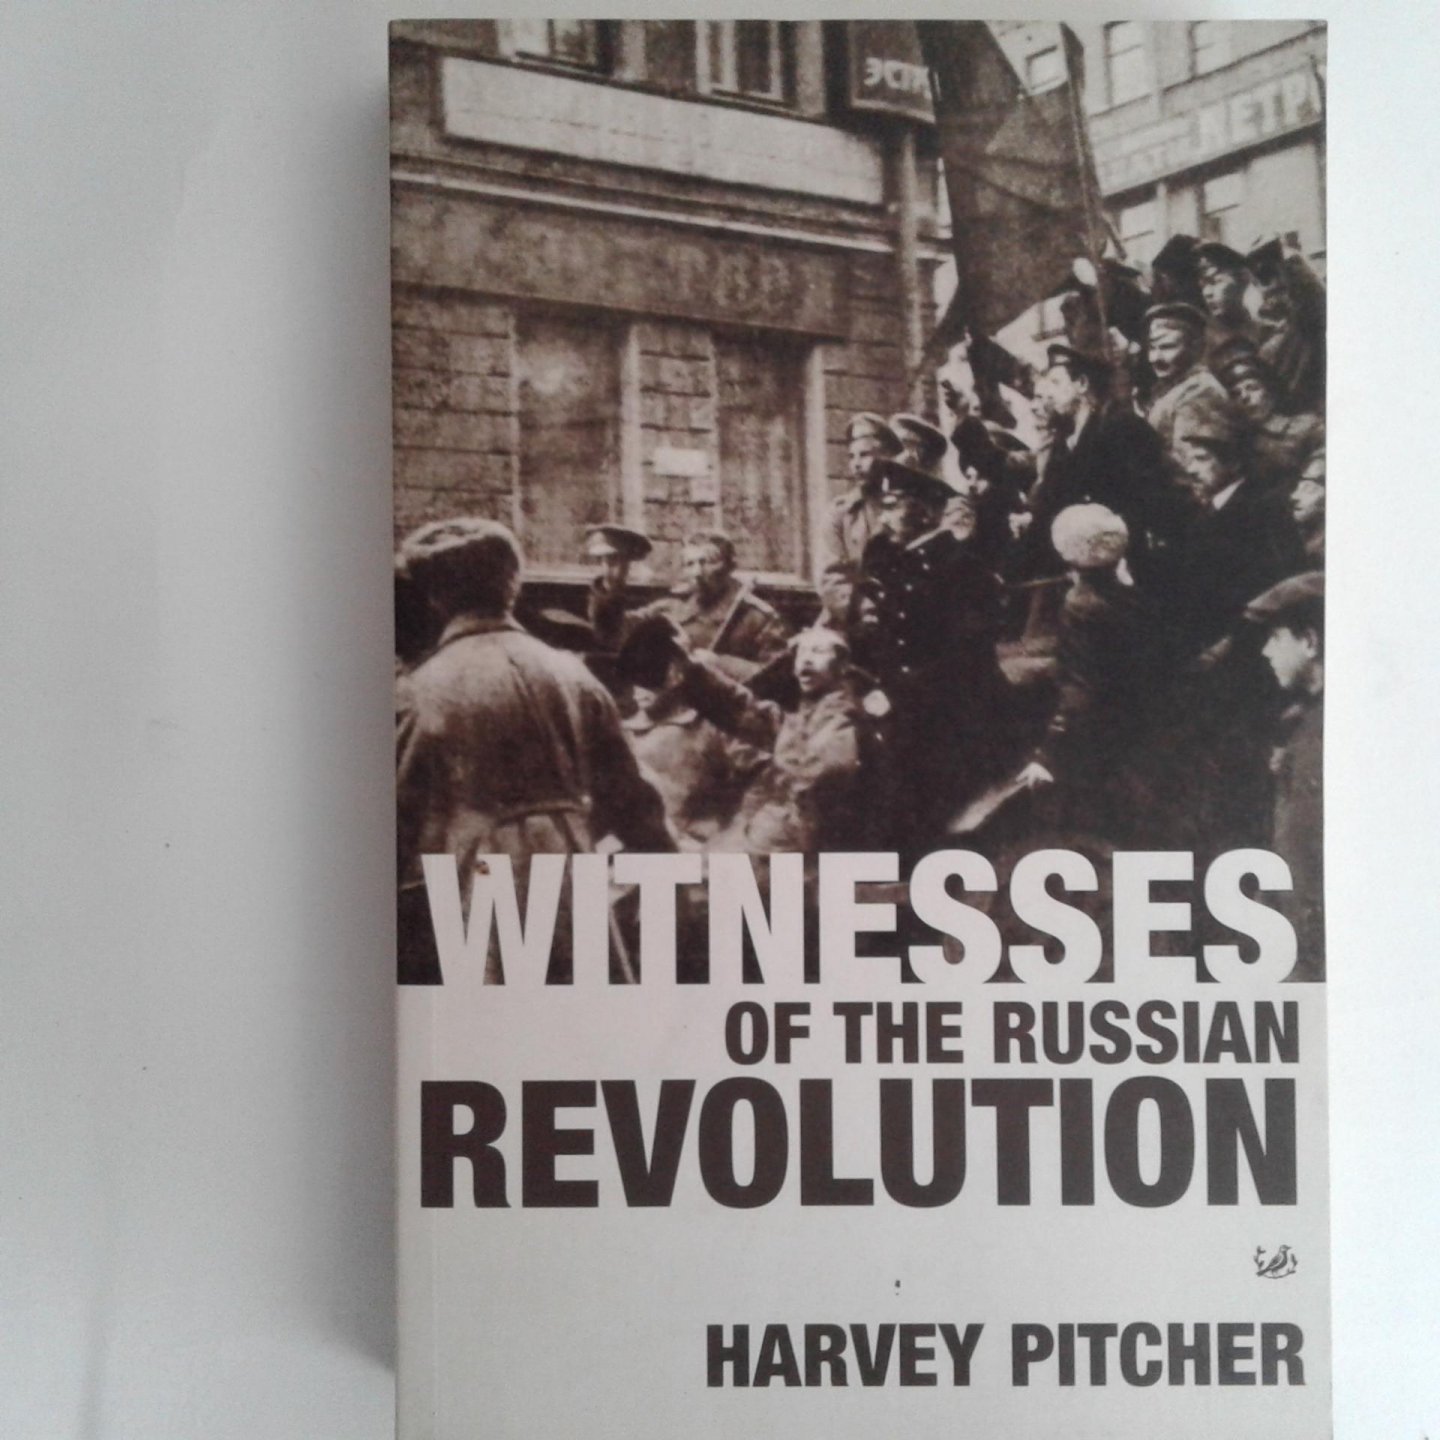 Pitcher, Harvey - Witnesses of the Russian Revolution